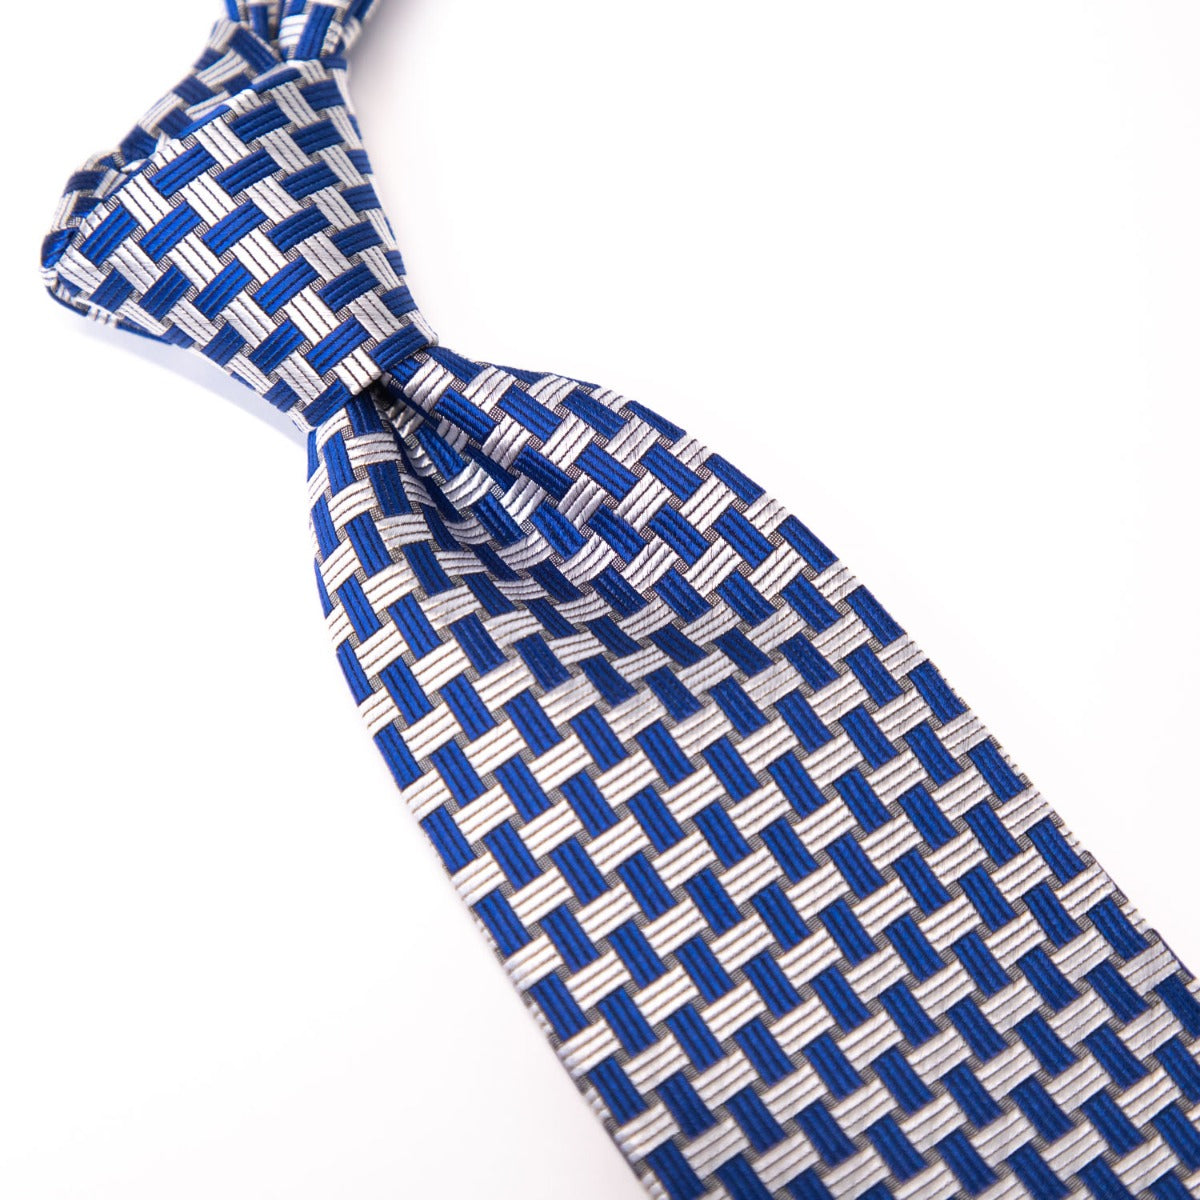 A Sovereign Grade Blue Basket Weave Silk Tie from KirbyAllison.com on a white surface.